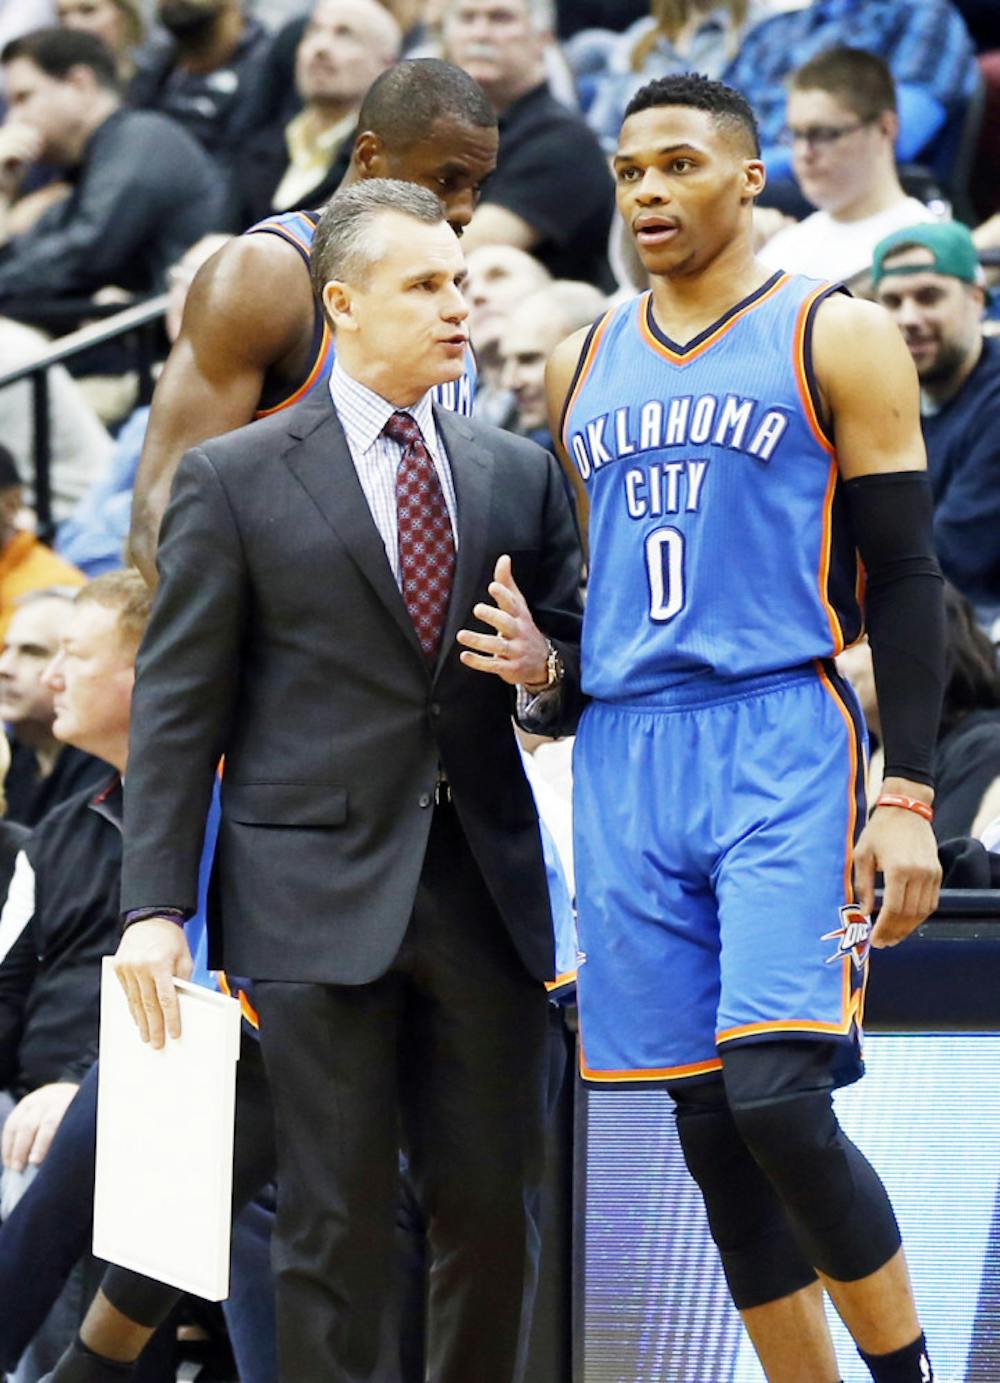 <p>Oklahoma City Thunder head coach Billy Donovan, left, chats with Russell Westbrook in the second half of an NBA basketball game against the Minnesota Timberwolves, Wednesday, Jan. 27, 2016, in Minneapolis. The Thunder won 126-123. (AP Photo/Jim Mone)</p>